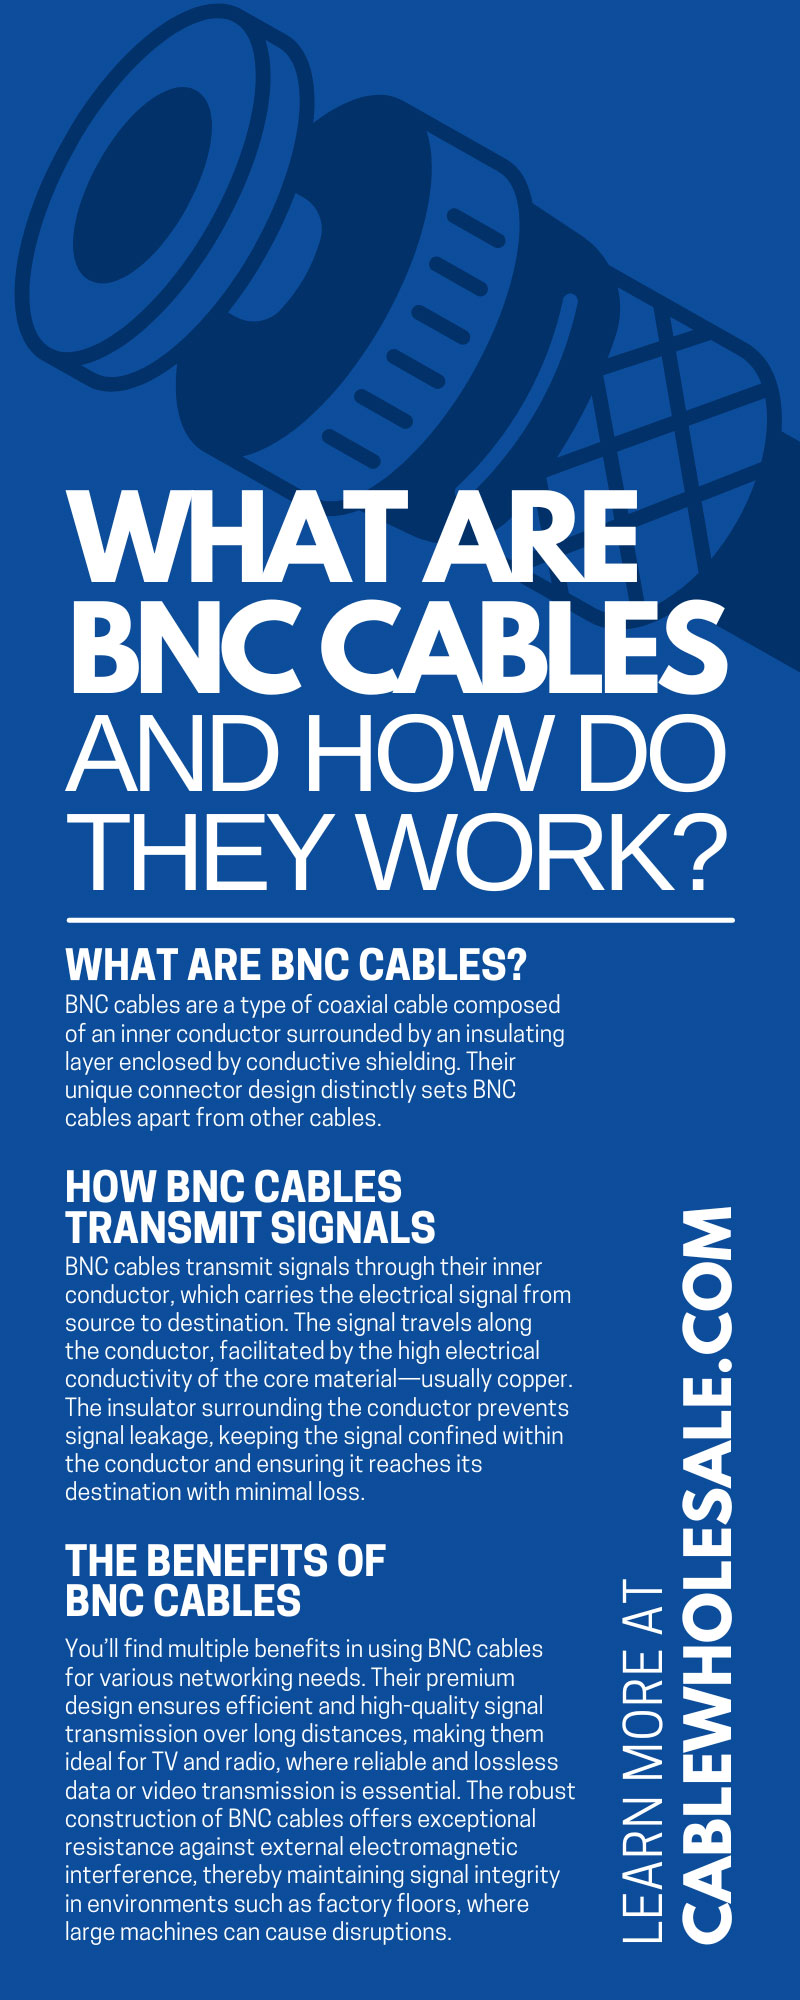 What Are BNC Cables and How Do They Work?